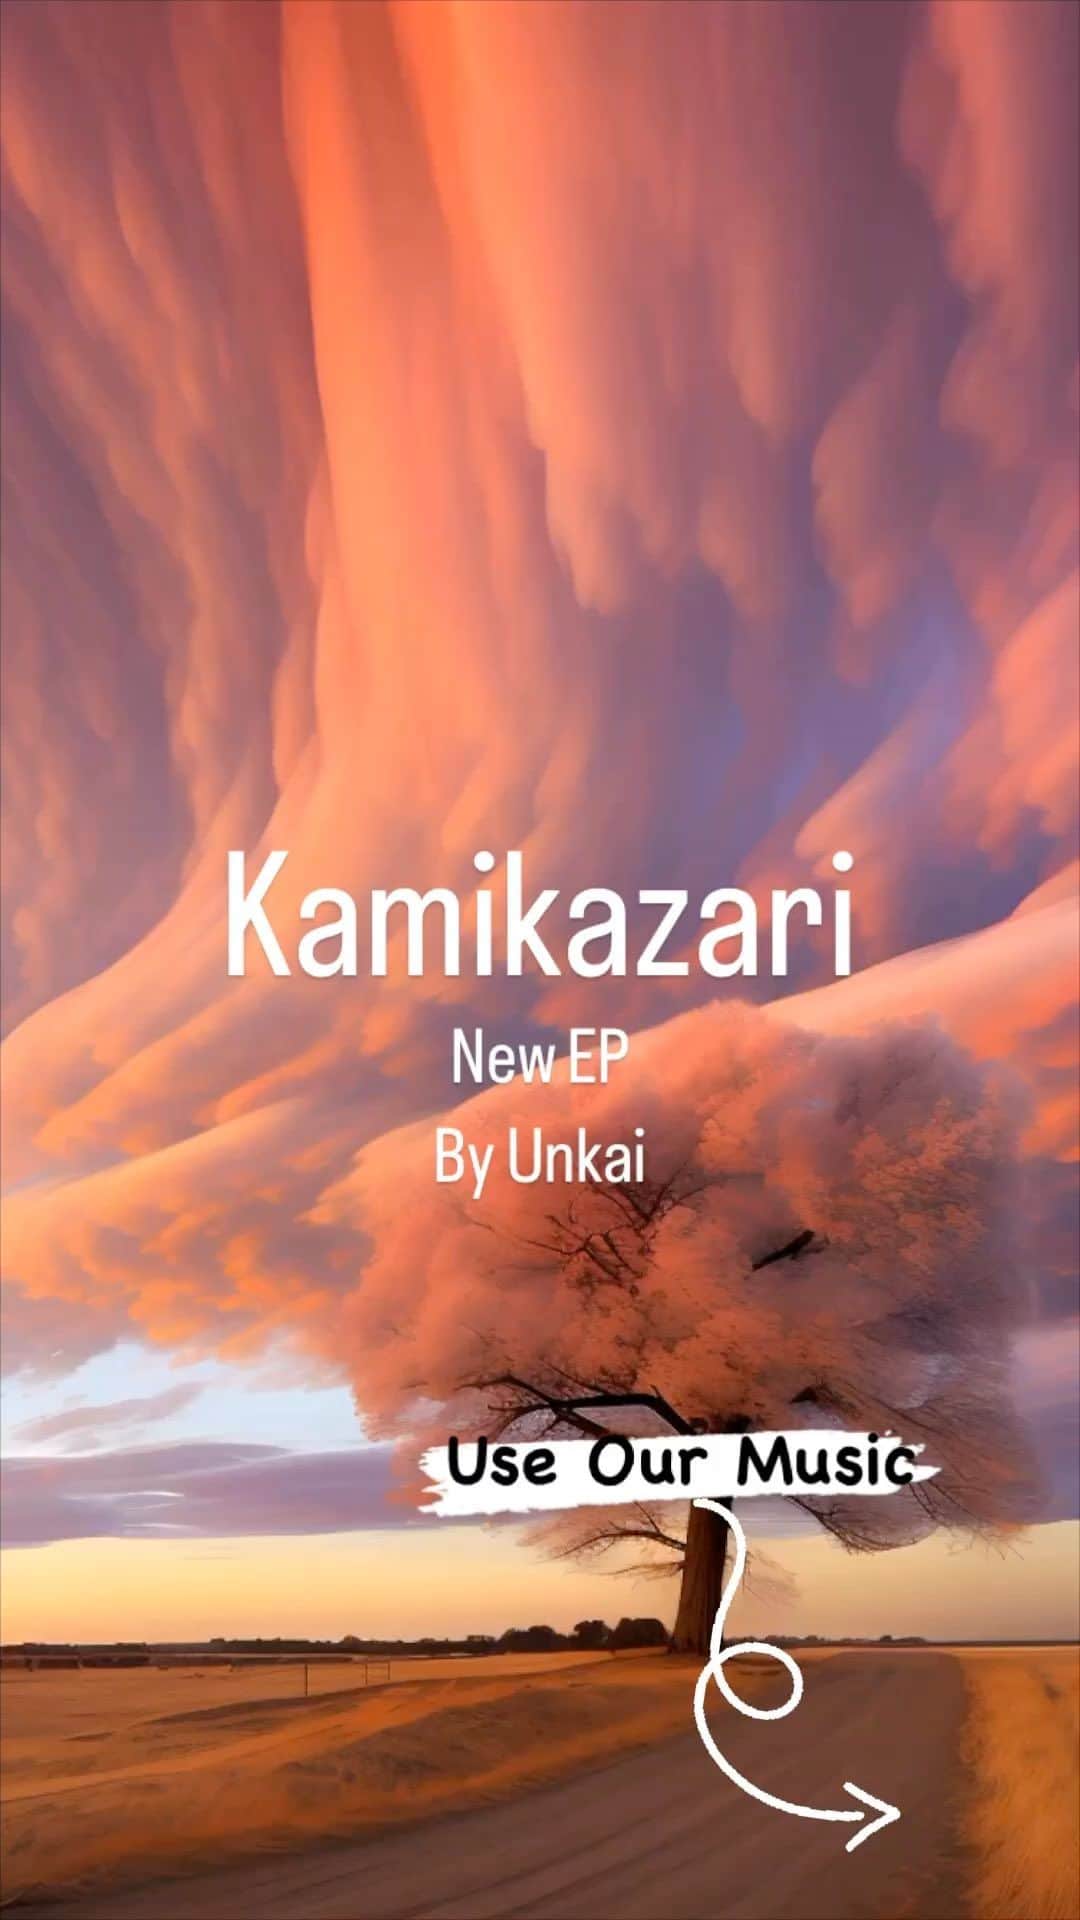 Cafe Music BGM channelのインスタグラム：「Enter Tranquil Realms with Kamikazari by Unkai🌌 Ambient Electronic Bliss #Ambient #Electronic #Unkai  💿 Listen Everywhere: https://bgmc.lnk.to/nln3OQ5f 🎵 Unkai: https://bgmc.lnk.to/LnJGhkTJ  ／ 🎂 New Release ＼ November 10th In Stores 🎧 Kamikazari By Unkai  #EverydayMusic #AmbientJourney #ElectronicSerenity #KamikazariSounds #CalmElectronica #UnkaiVibes #EverydayListening #TranquilMelodies」